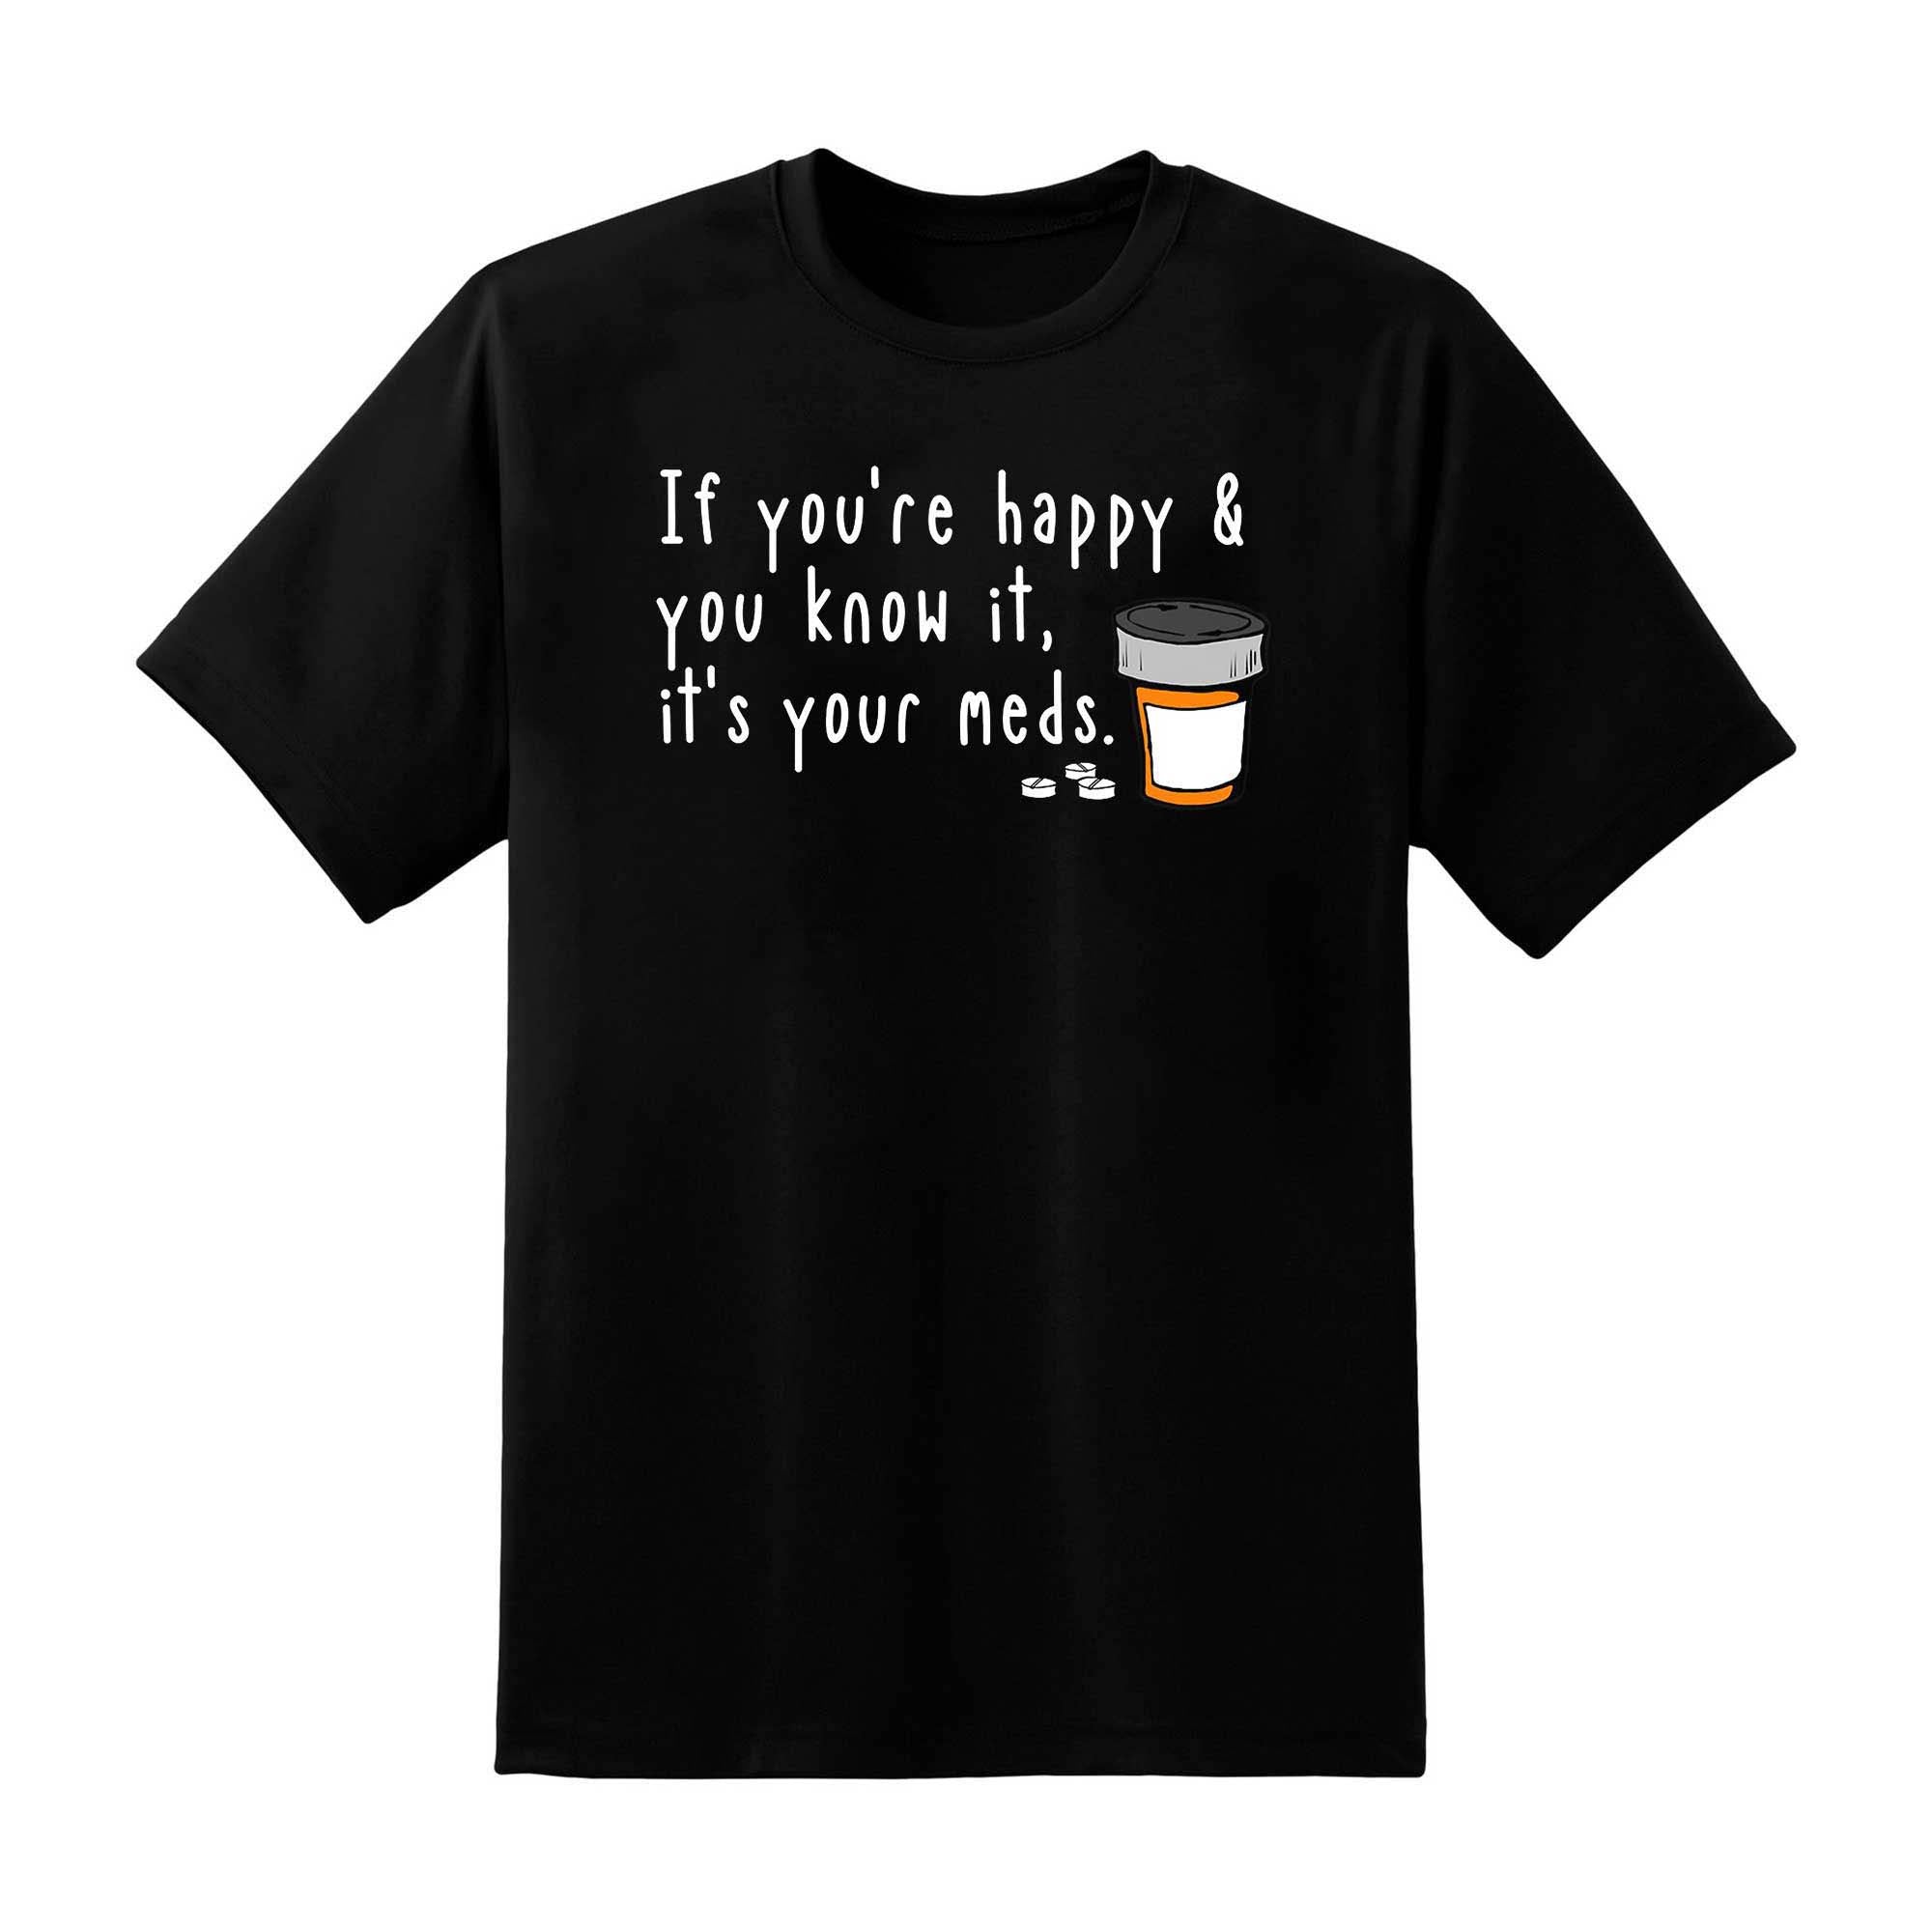 Skitongift Skitongift If YouRe Happy And You Know It It's Your Meds Classic T Shirt Funny Shirts